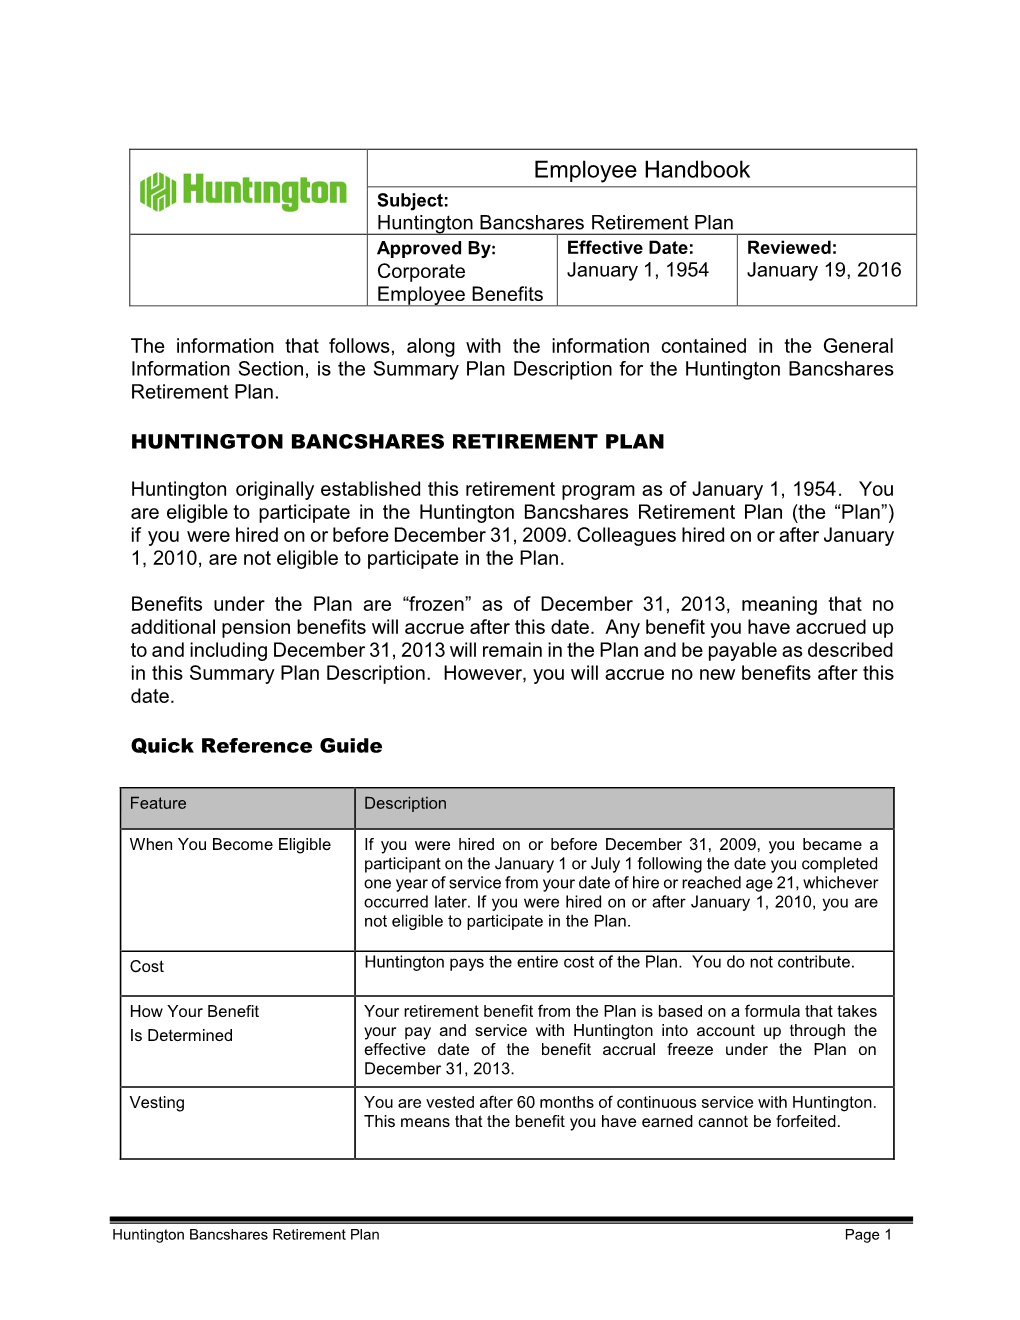 Employee Handbook Subject: Huntington Bancshares Retirement Plan Approved By: Effective Date: Reviewed: Corporate January 1, 1954 January 19, 2016 Employee Benefits